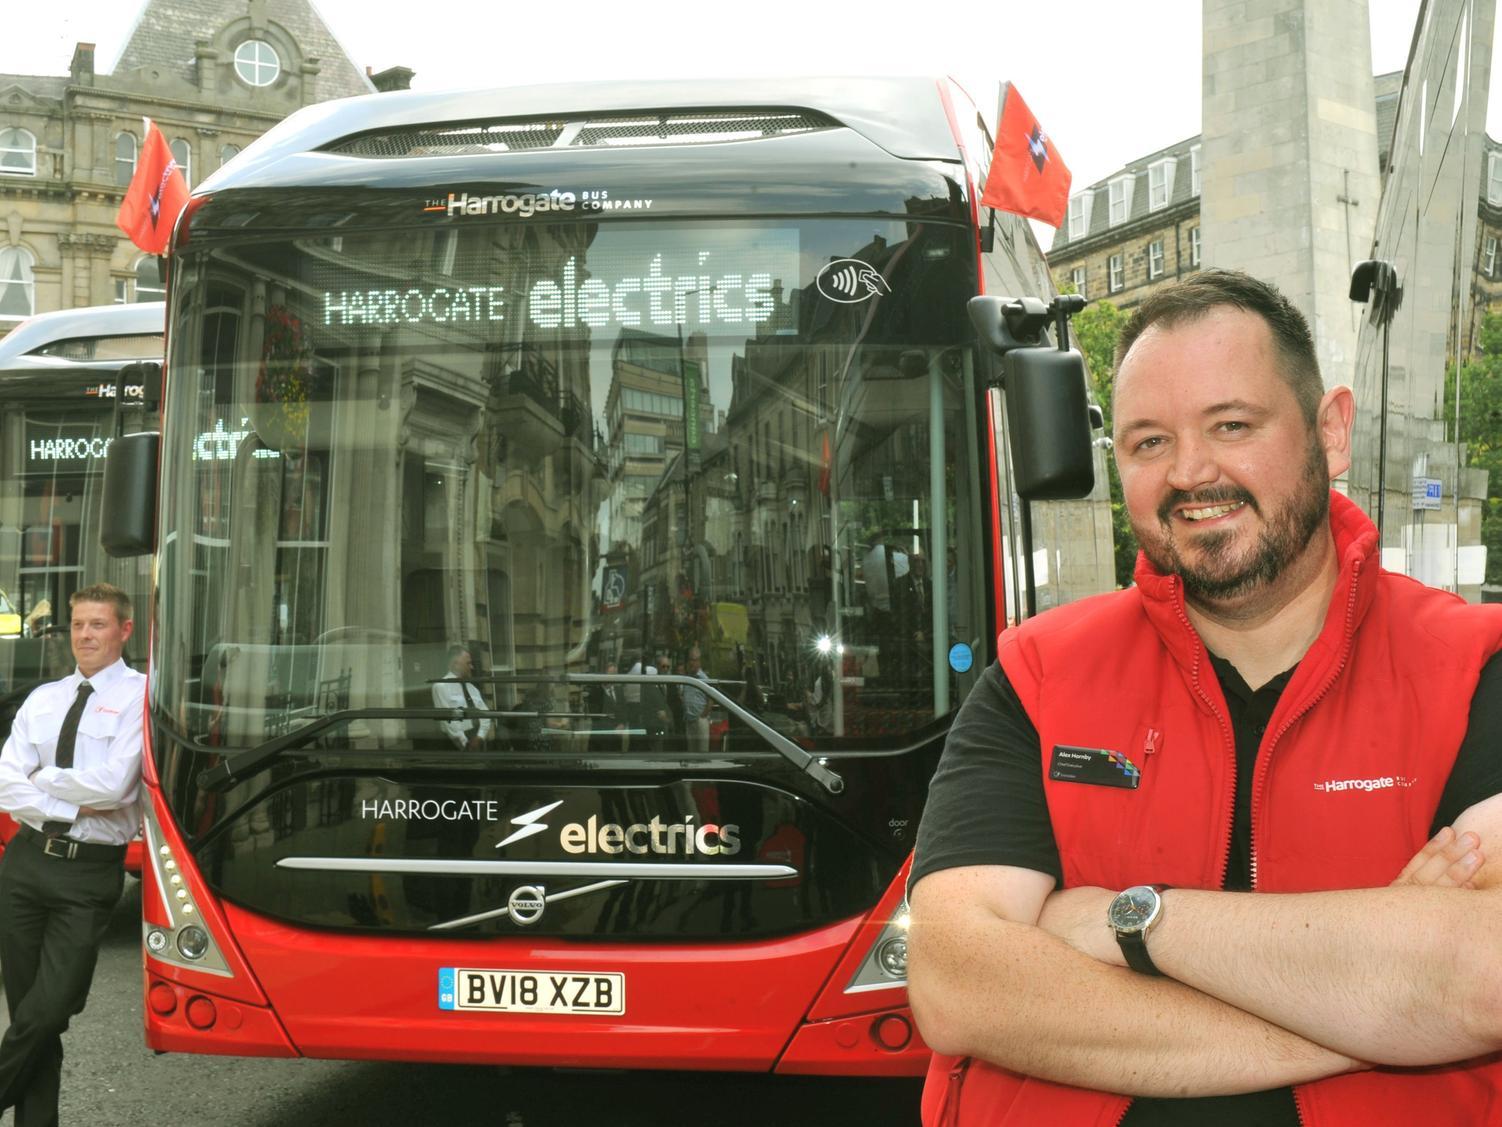 In 2018, electric buses arrived in Harrogate, making us the UK's first ever low-emissions bus town. The buses feature Wi-fi and mobile charging points and are a 'cleaner' alternative to traditional public transport.